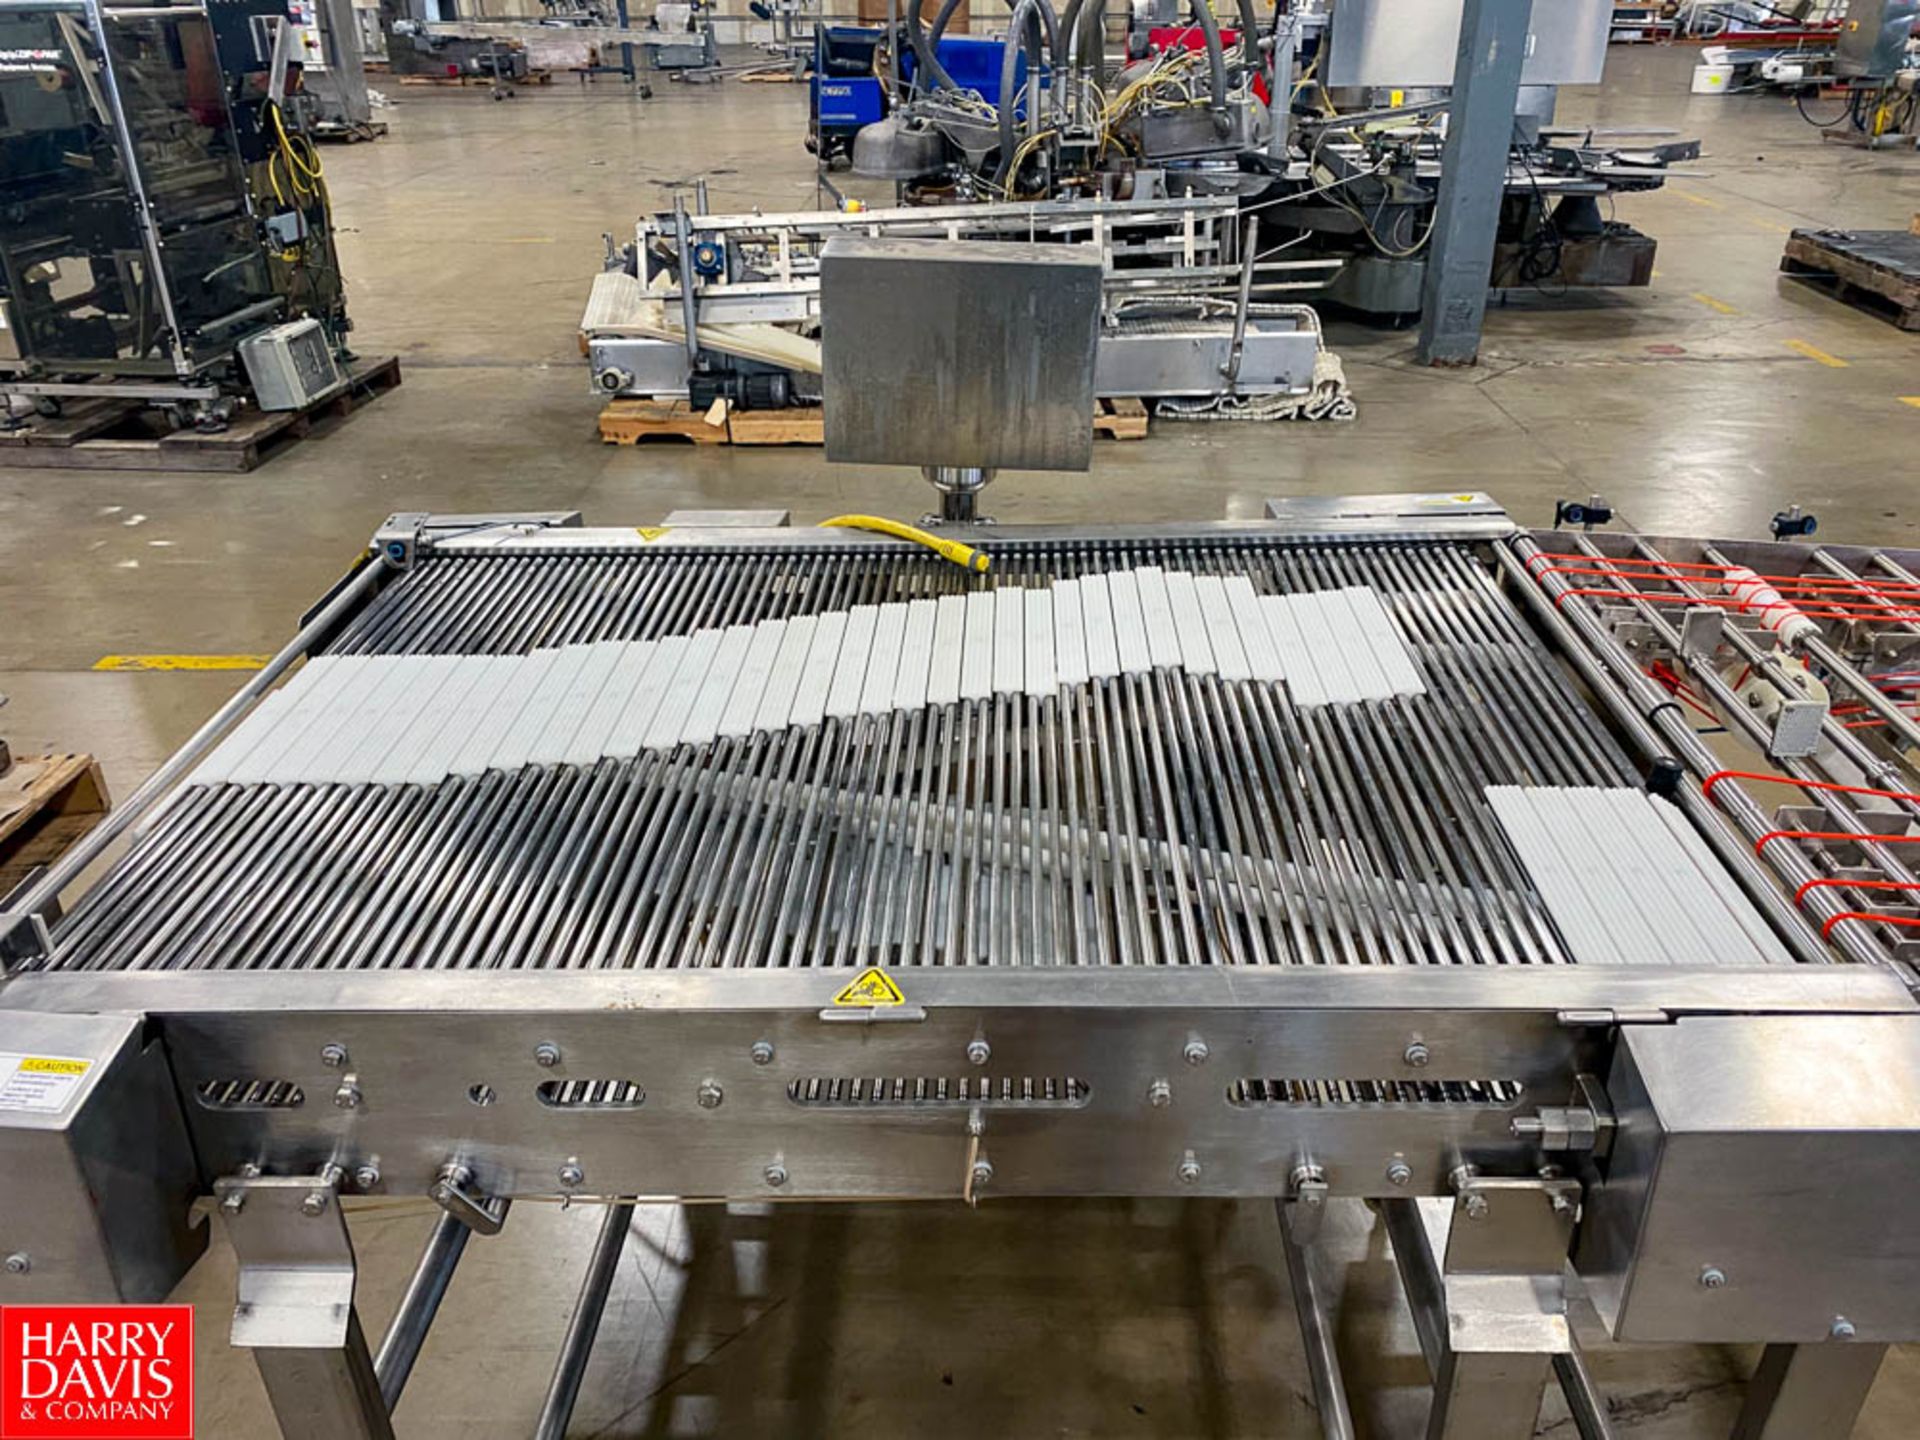 9' Length x 3' Width S/S Directional Product Conveyor with Allen-Bradley PanelView C600 and - Image 2 of 2